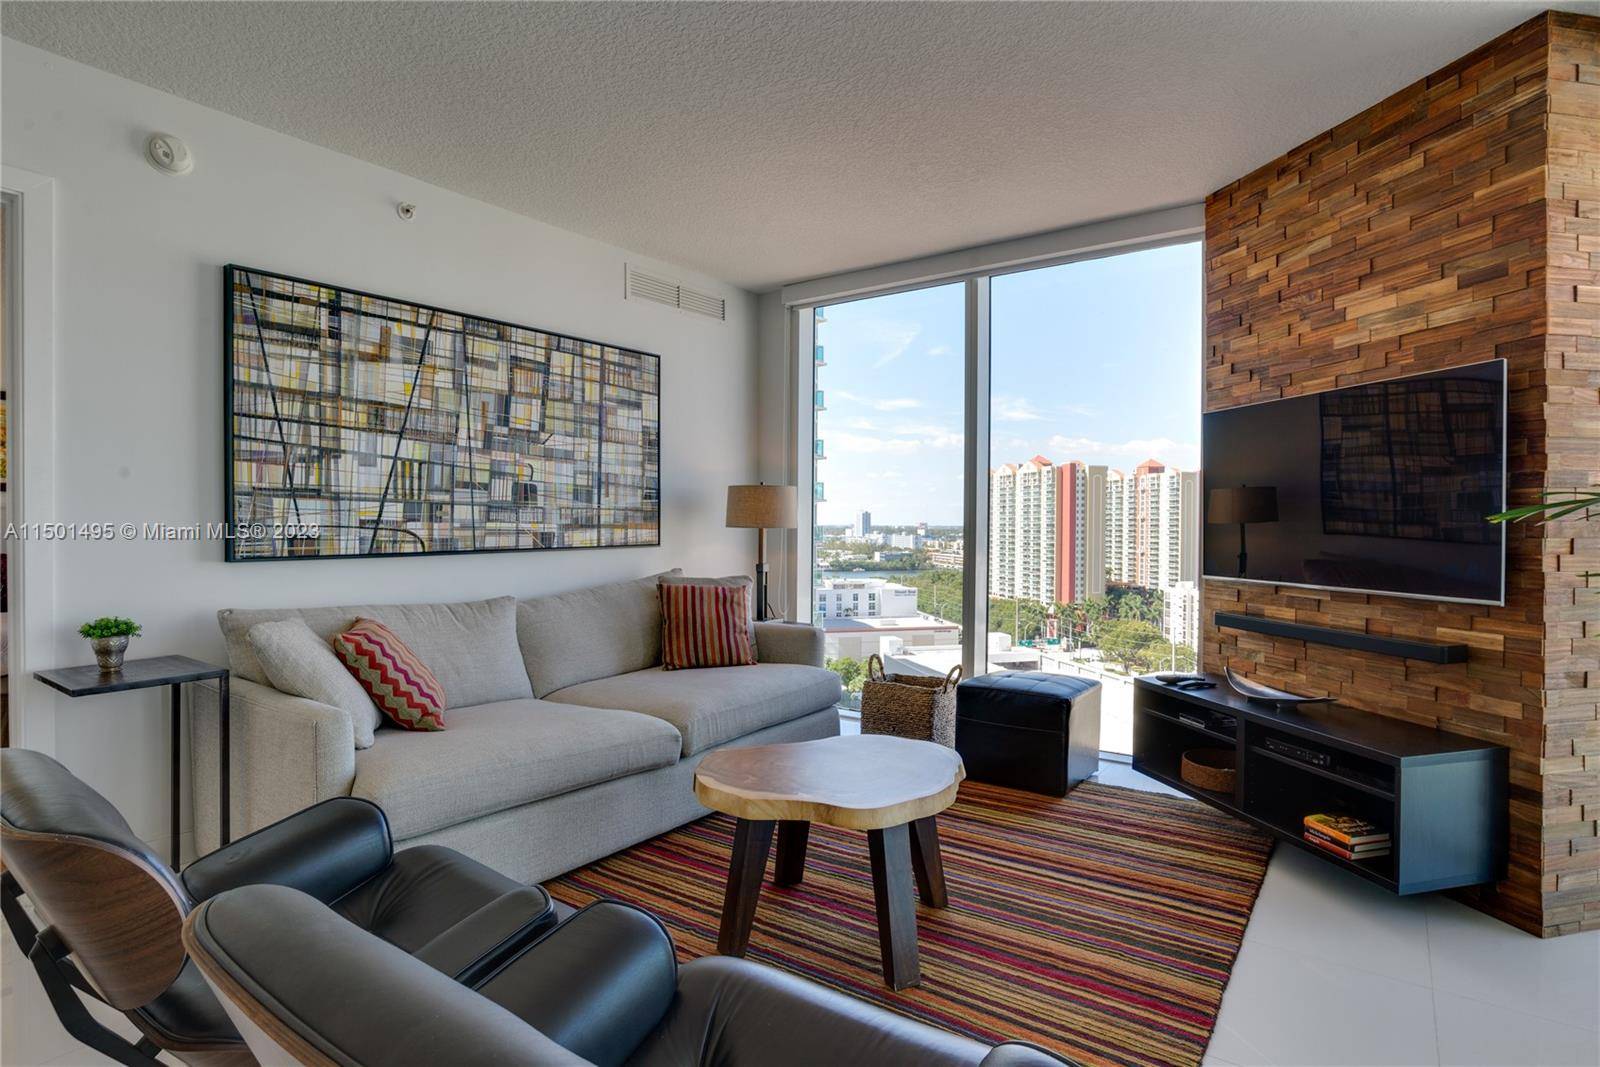 Stunning modern 3 bedroom, 2 bathroom corner unit featuring a gorgeous city and partial ocean view.